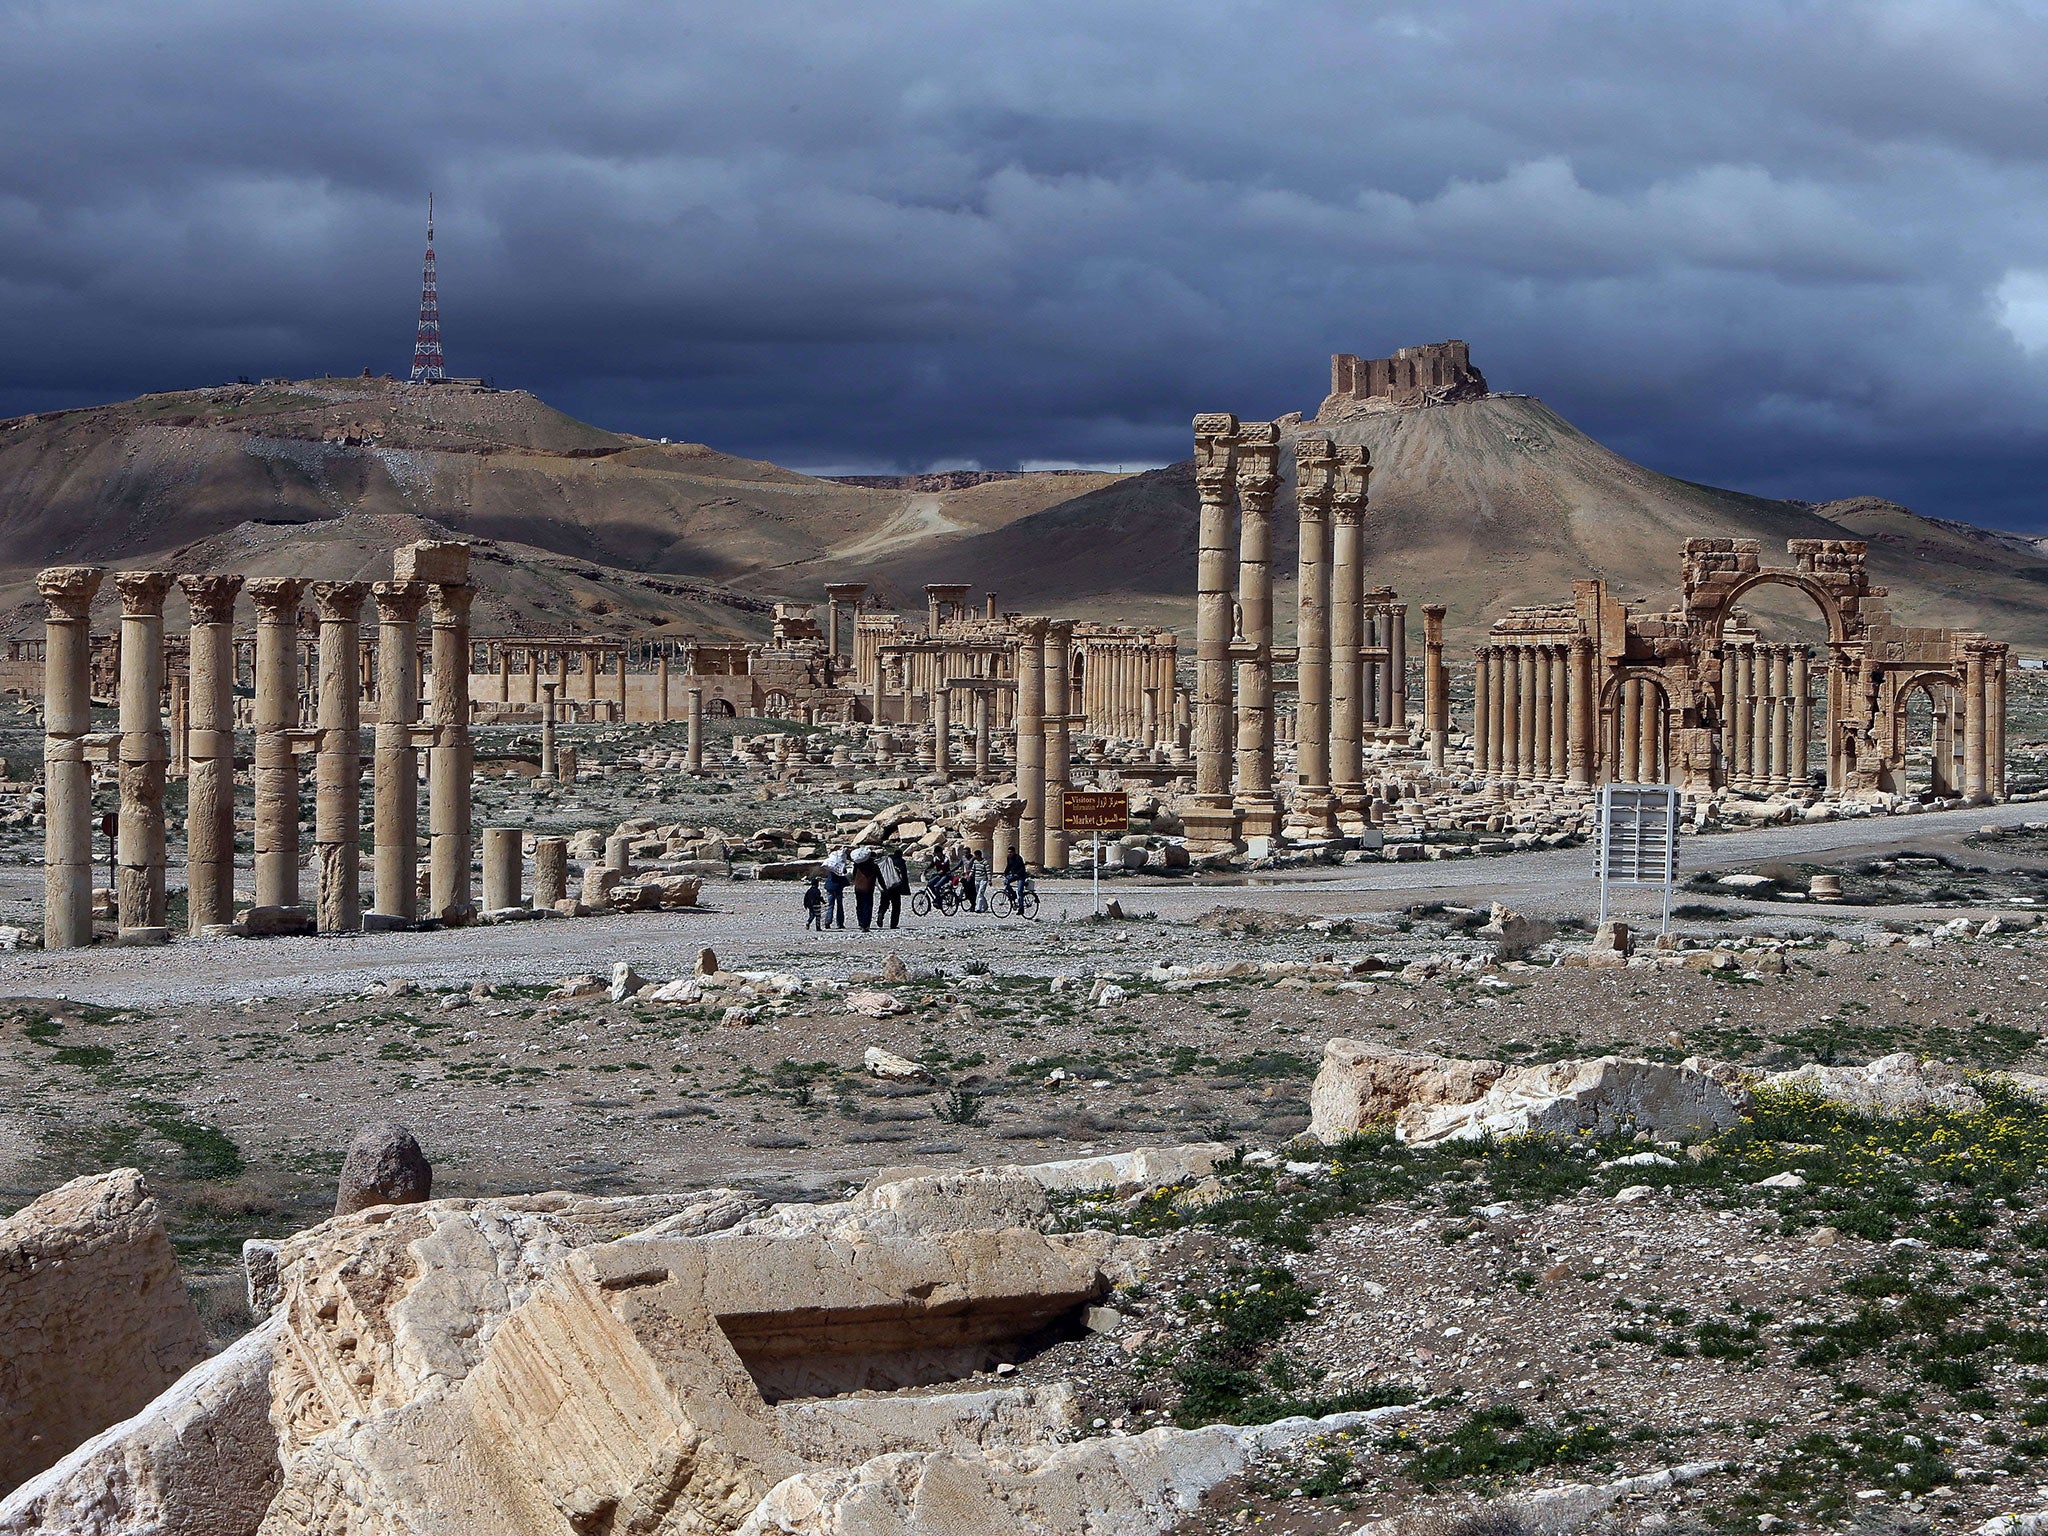 Isis seized the citadel and columns of the ancient oasis city of Palmyra, 133 miles north-east of Damascus, in May 2015